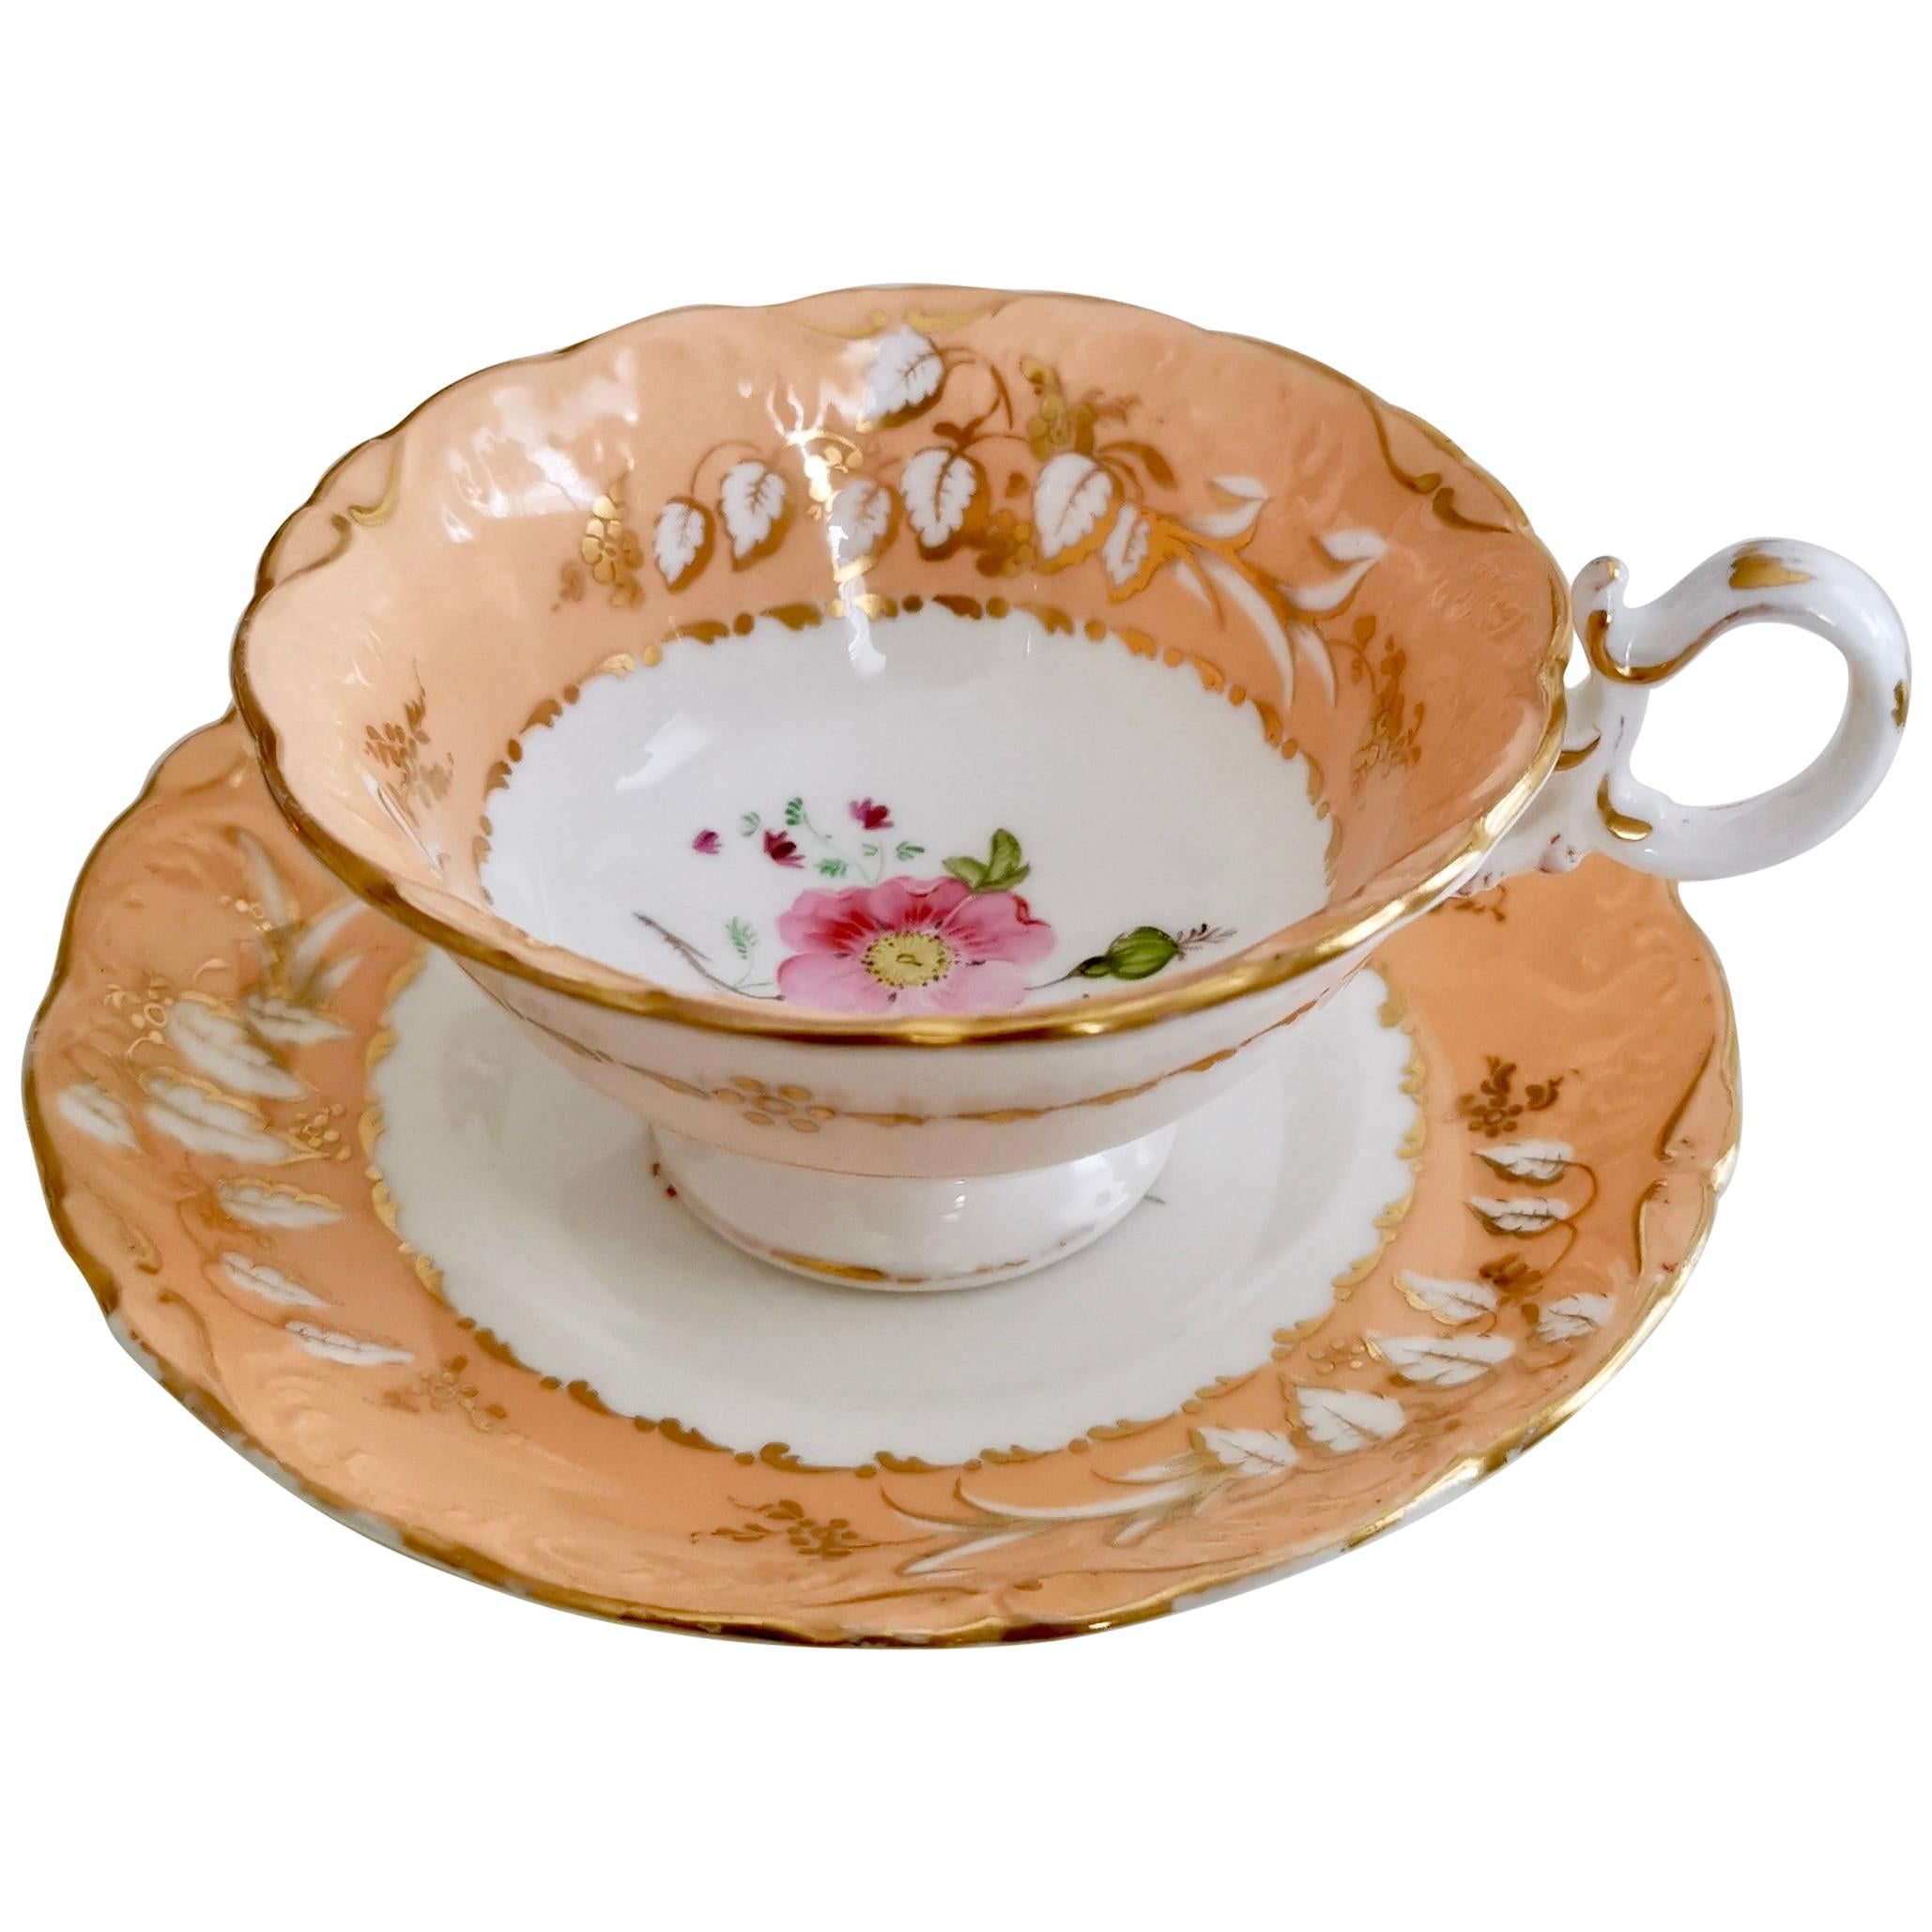 Coalport Teacup, Adelaide Shape, Peach-Colored with Roses, circa 1839